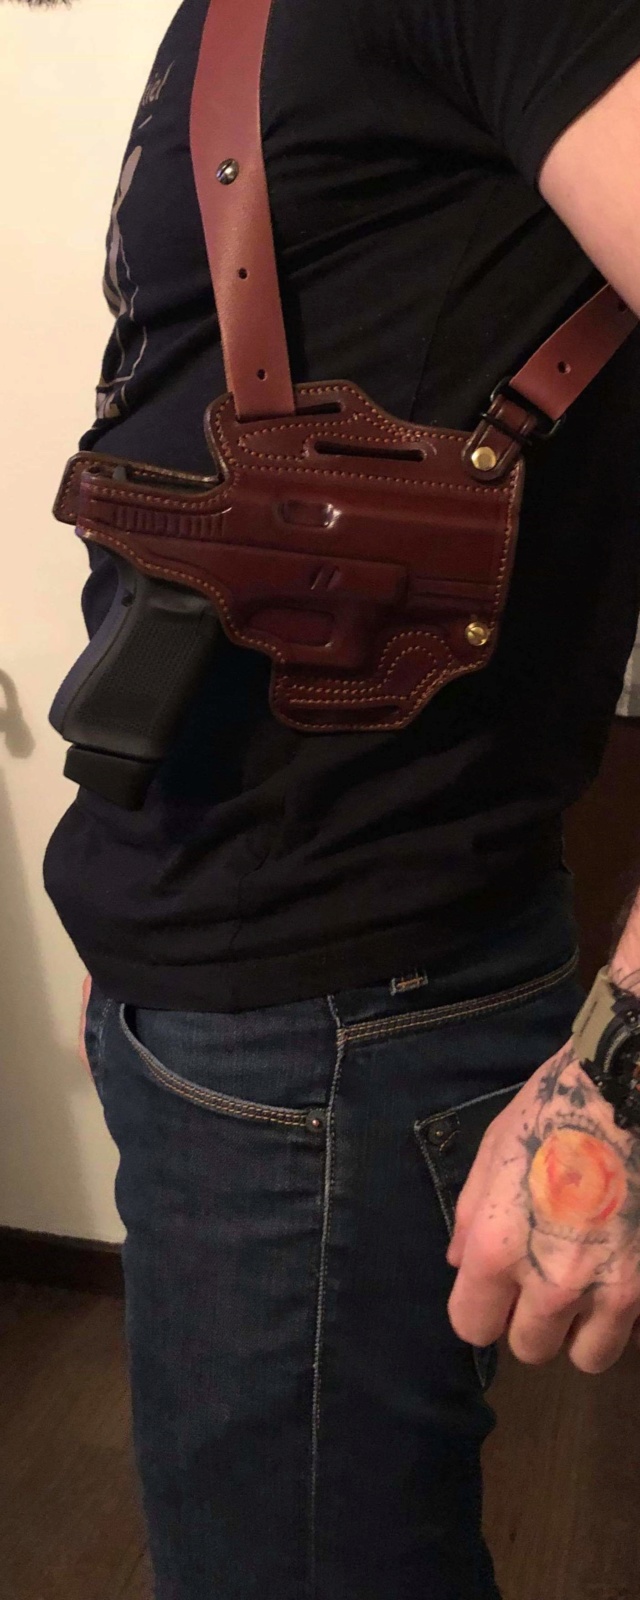 SIG 2022 "TRIADE" HOLSTER by La SELLERIE  Receiv16